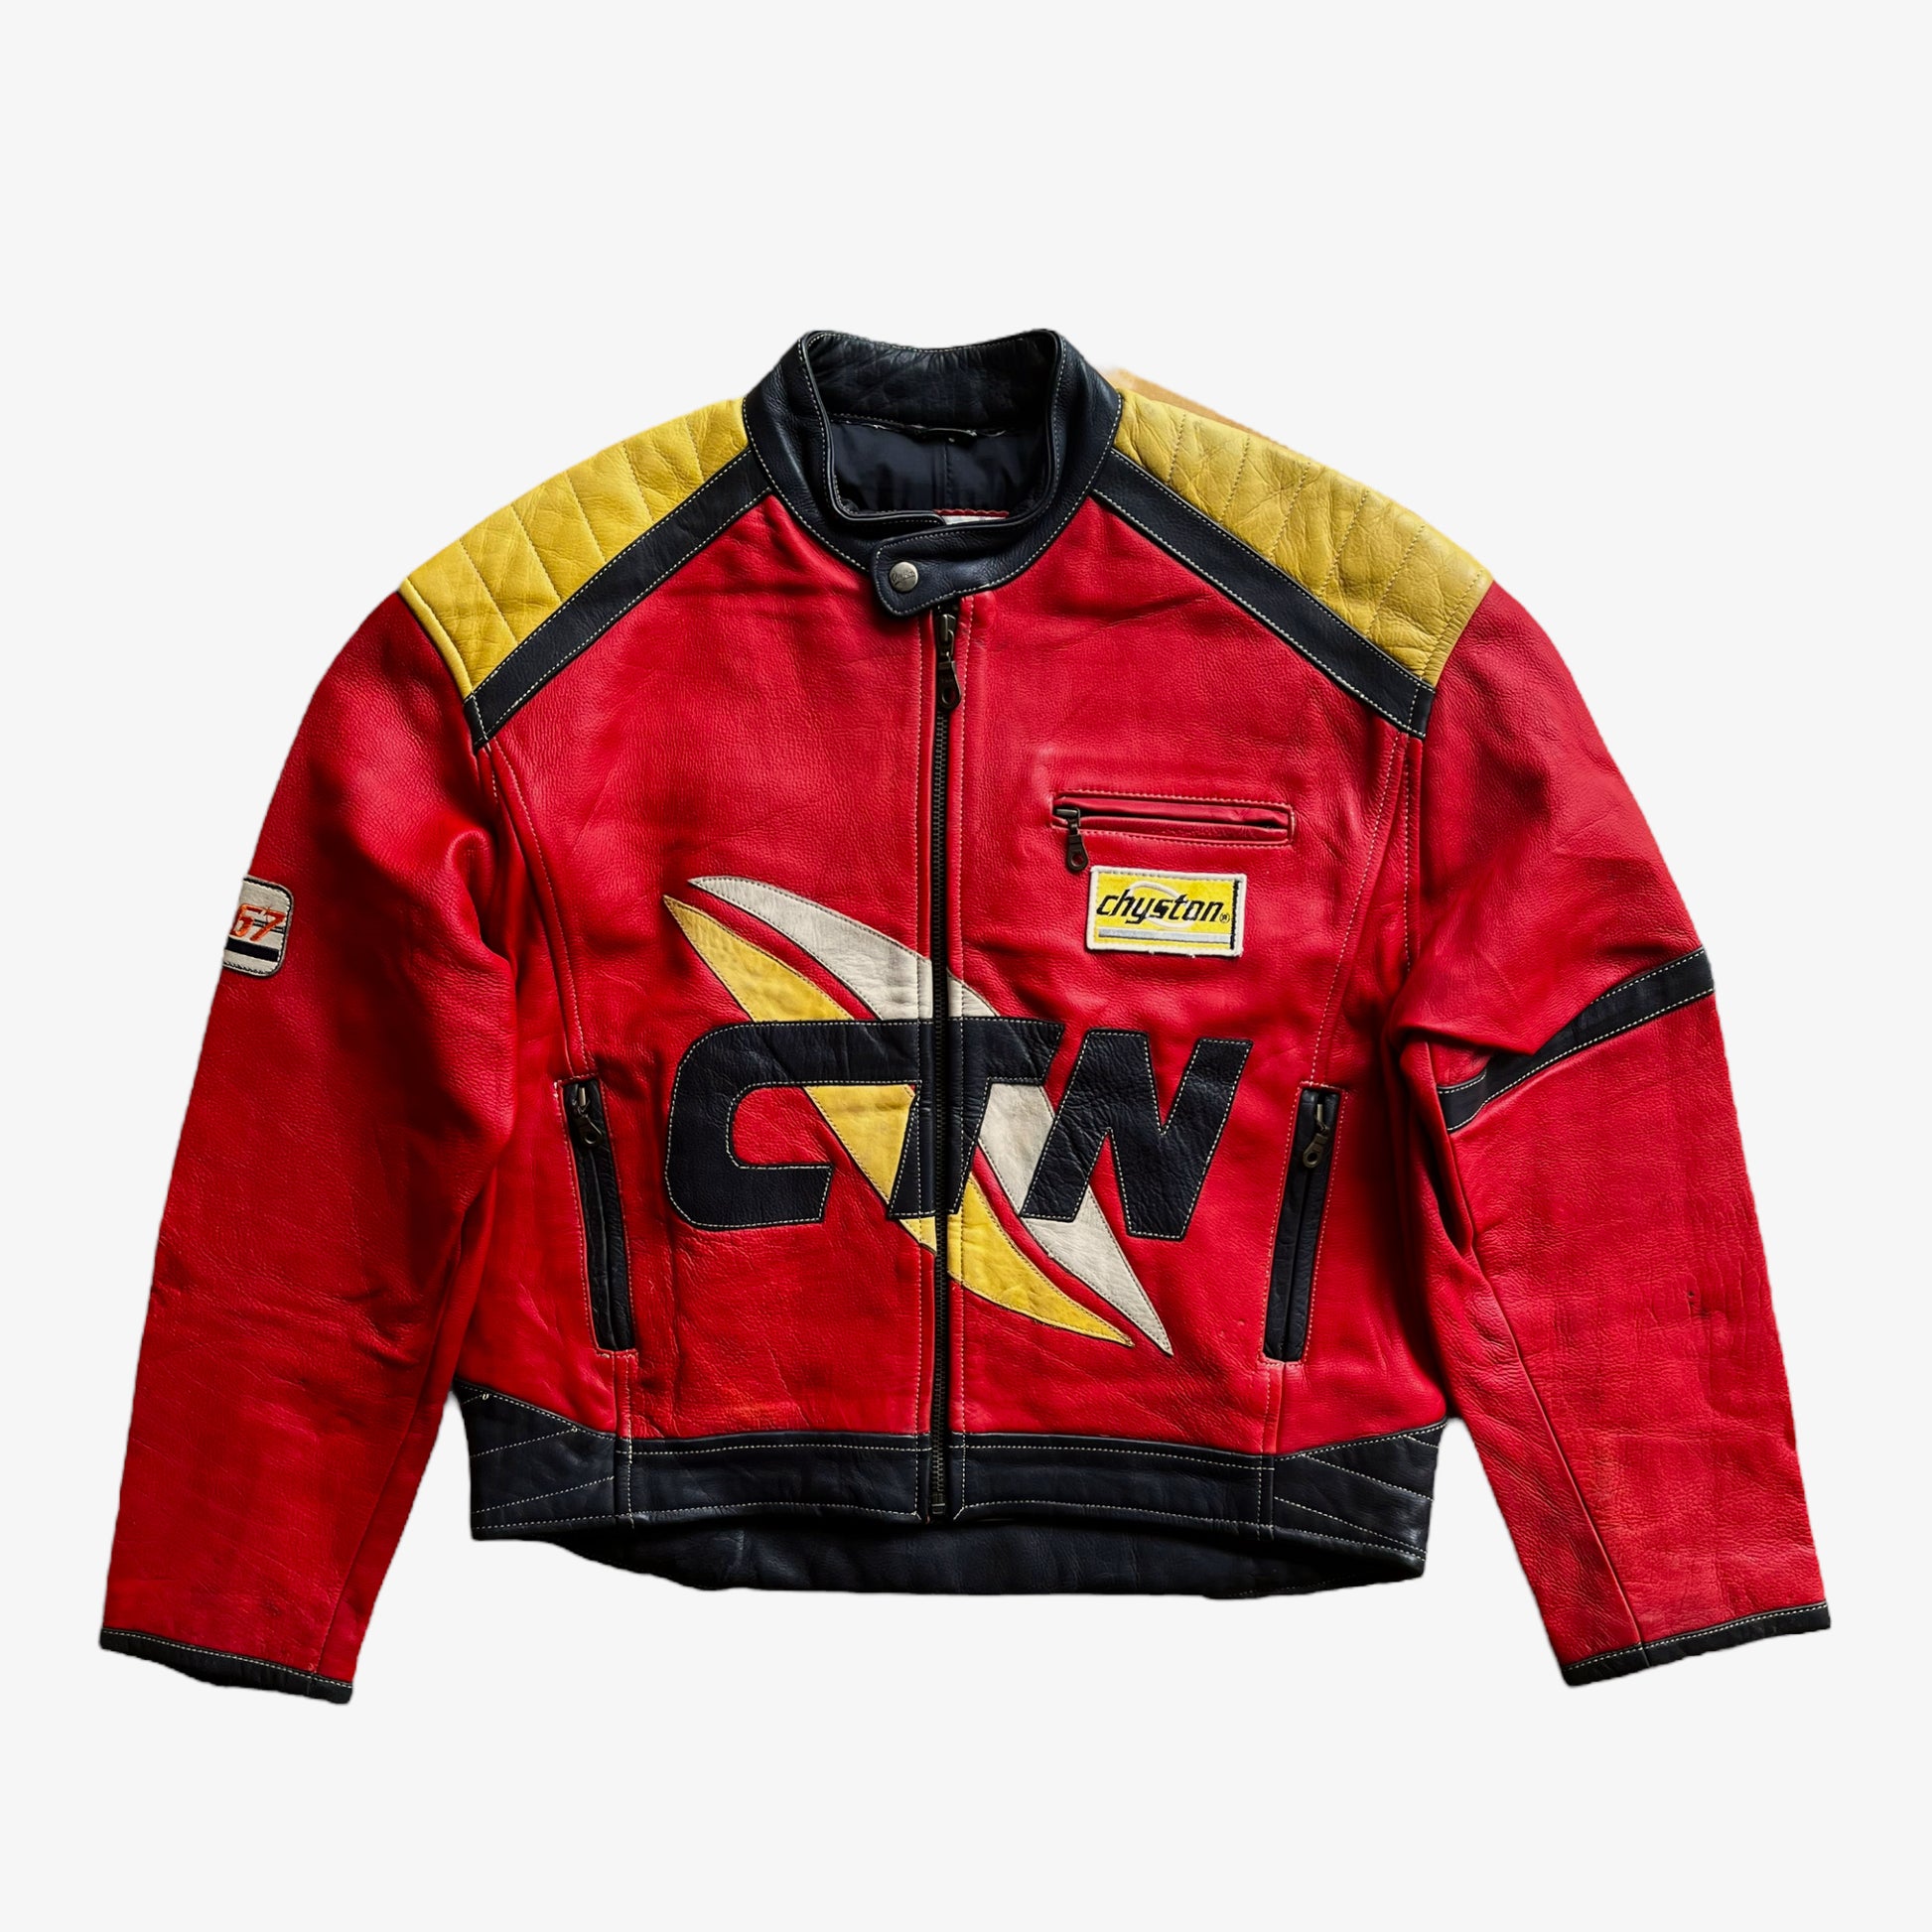 Vintage 1980s Chyston Red Leather Racing Jacket - Casspios Dream